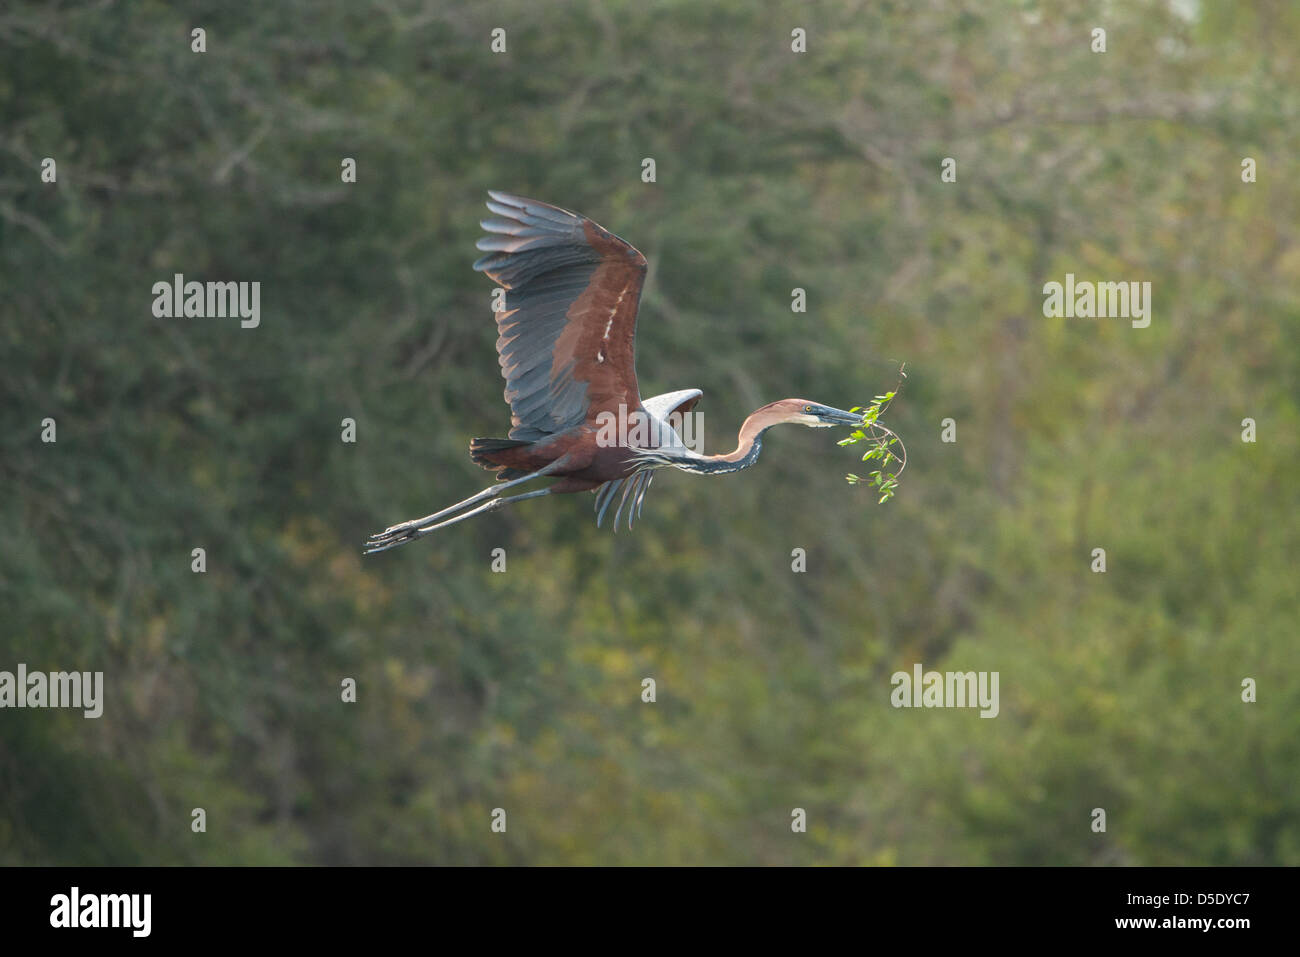 A Goliath heron flying with nest material in its beak (Ardea goliath) Stock Photo